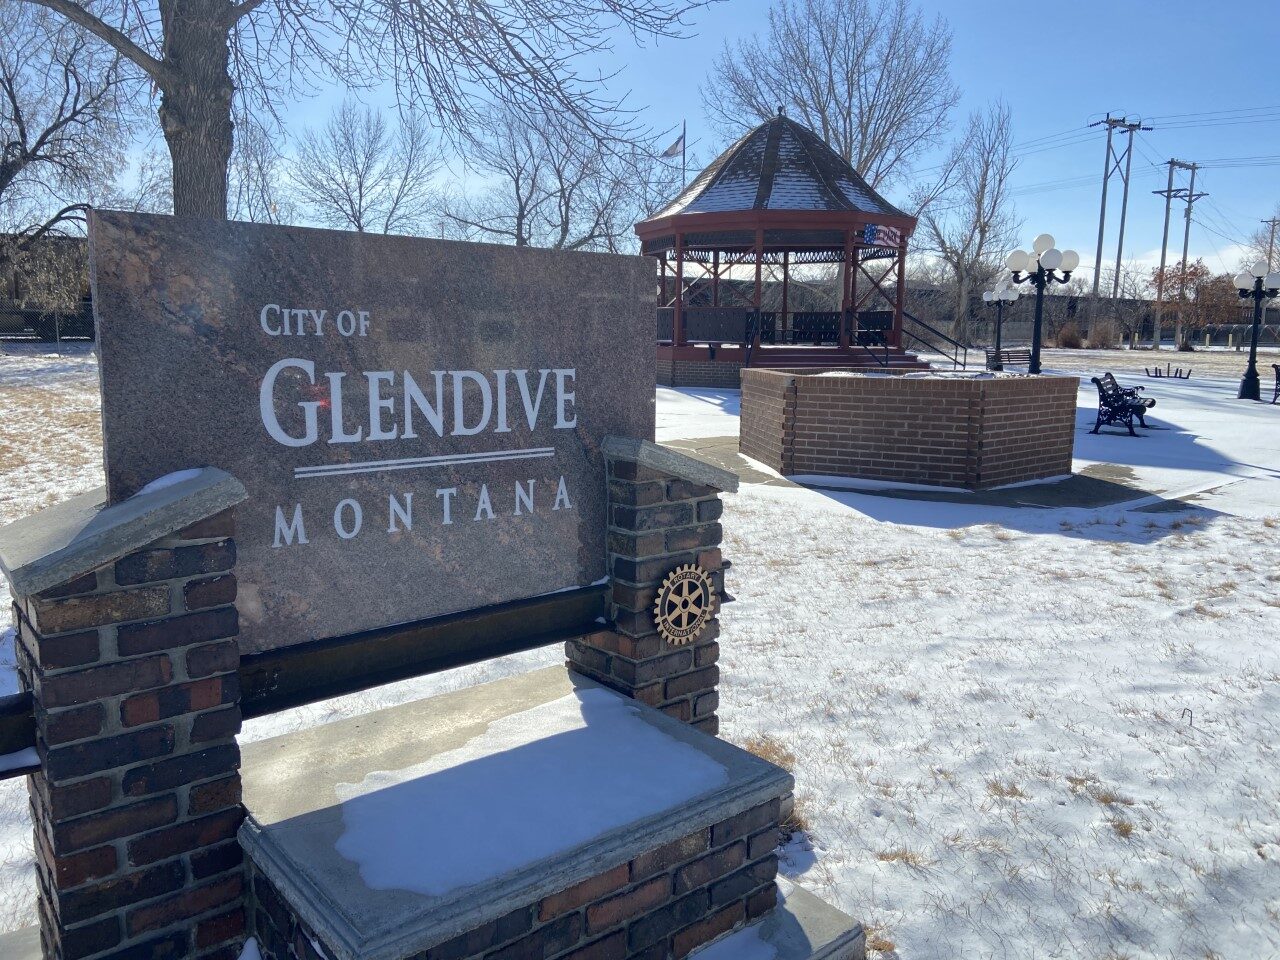 The town of Glendive, MT